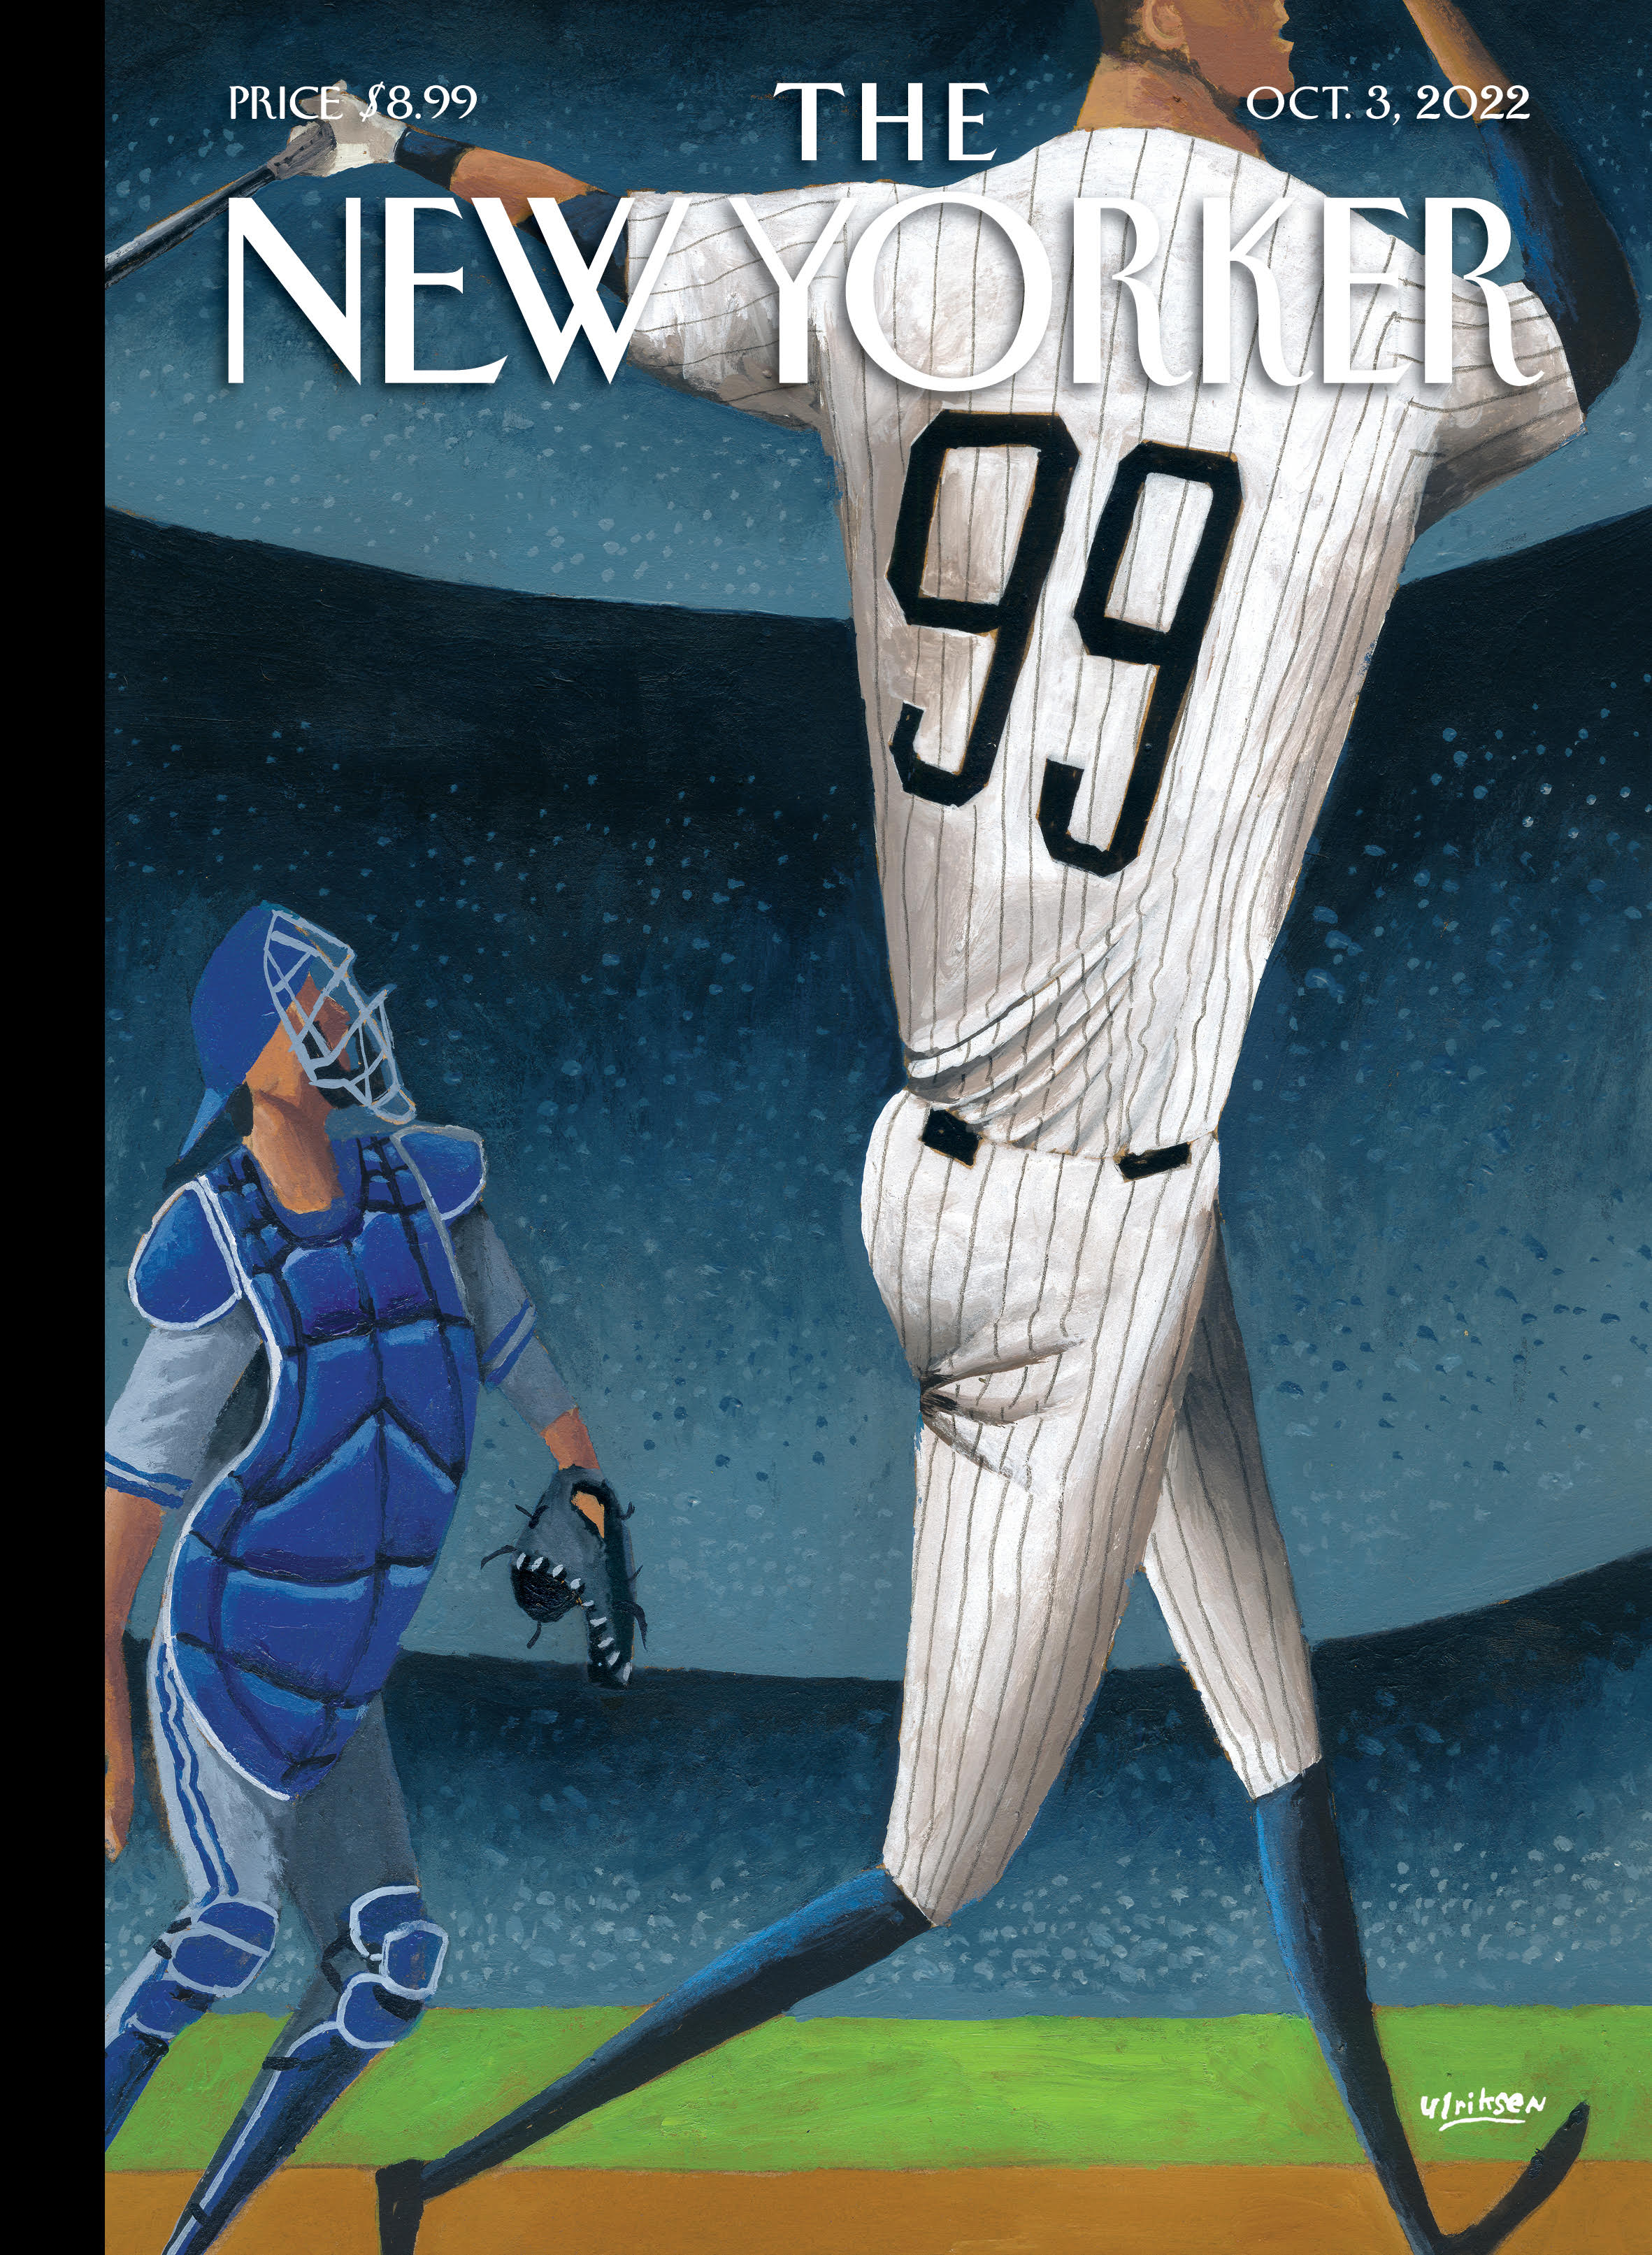 The New Yorker - “All Rise!” October 3, 2022